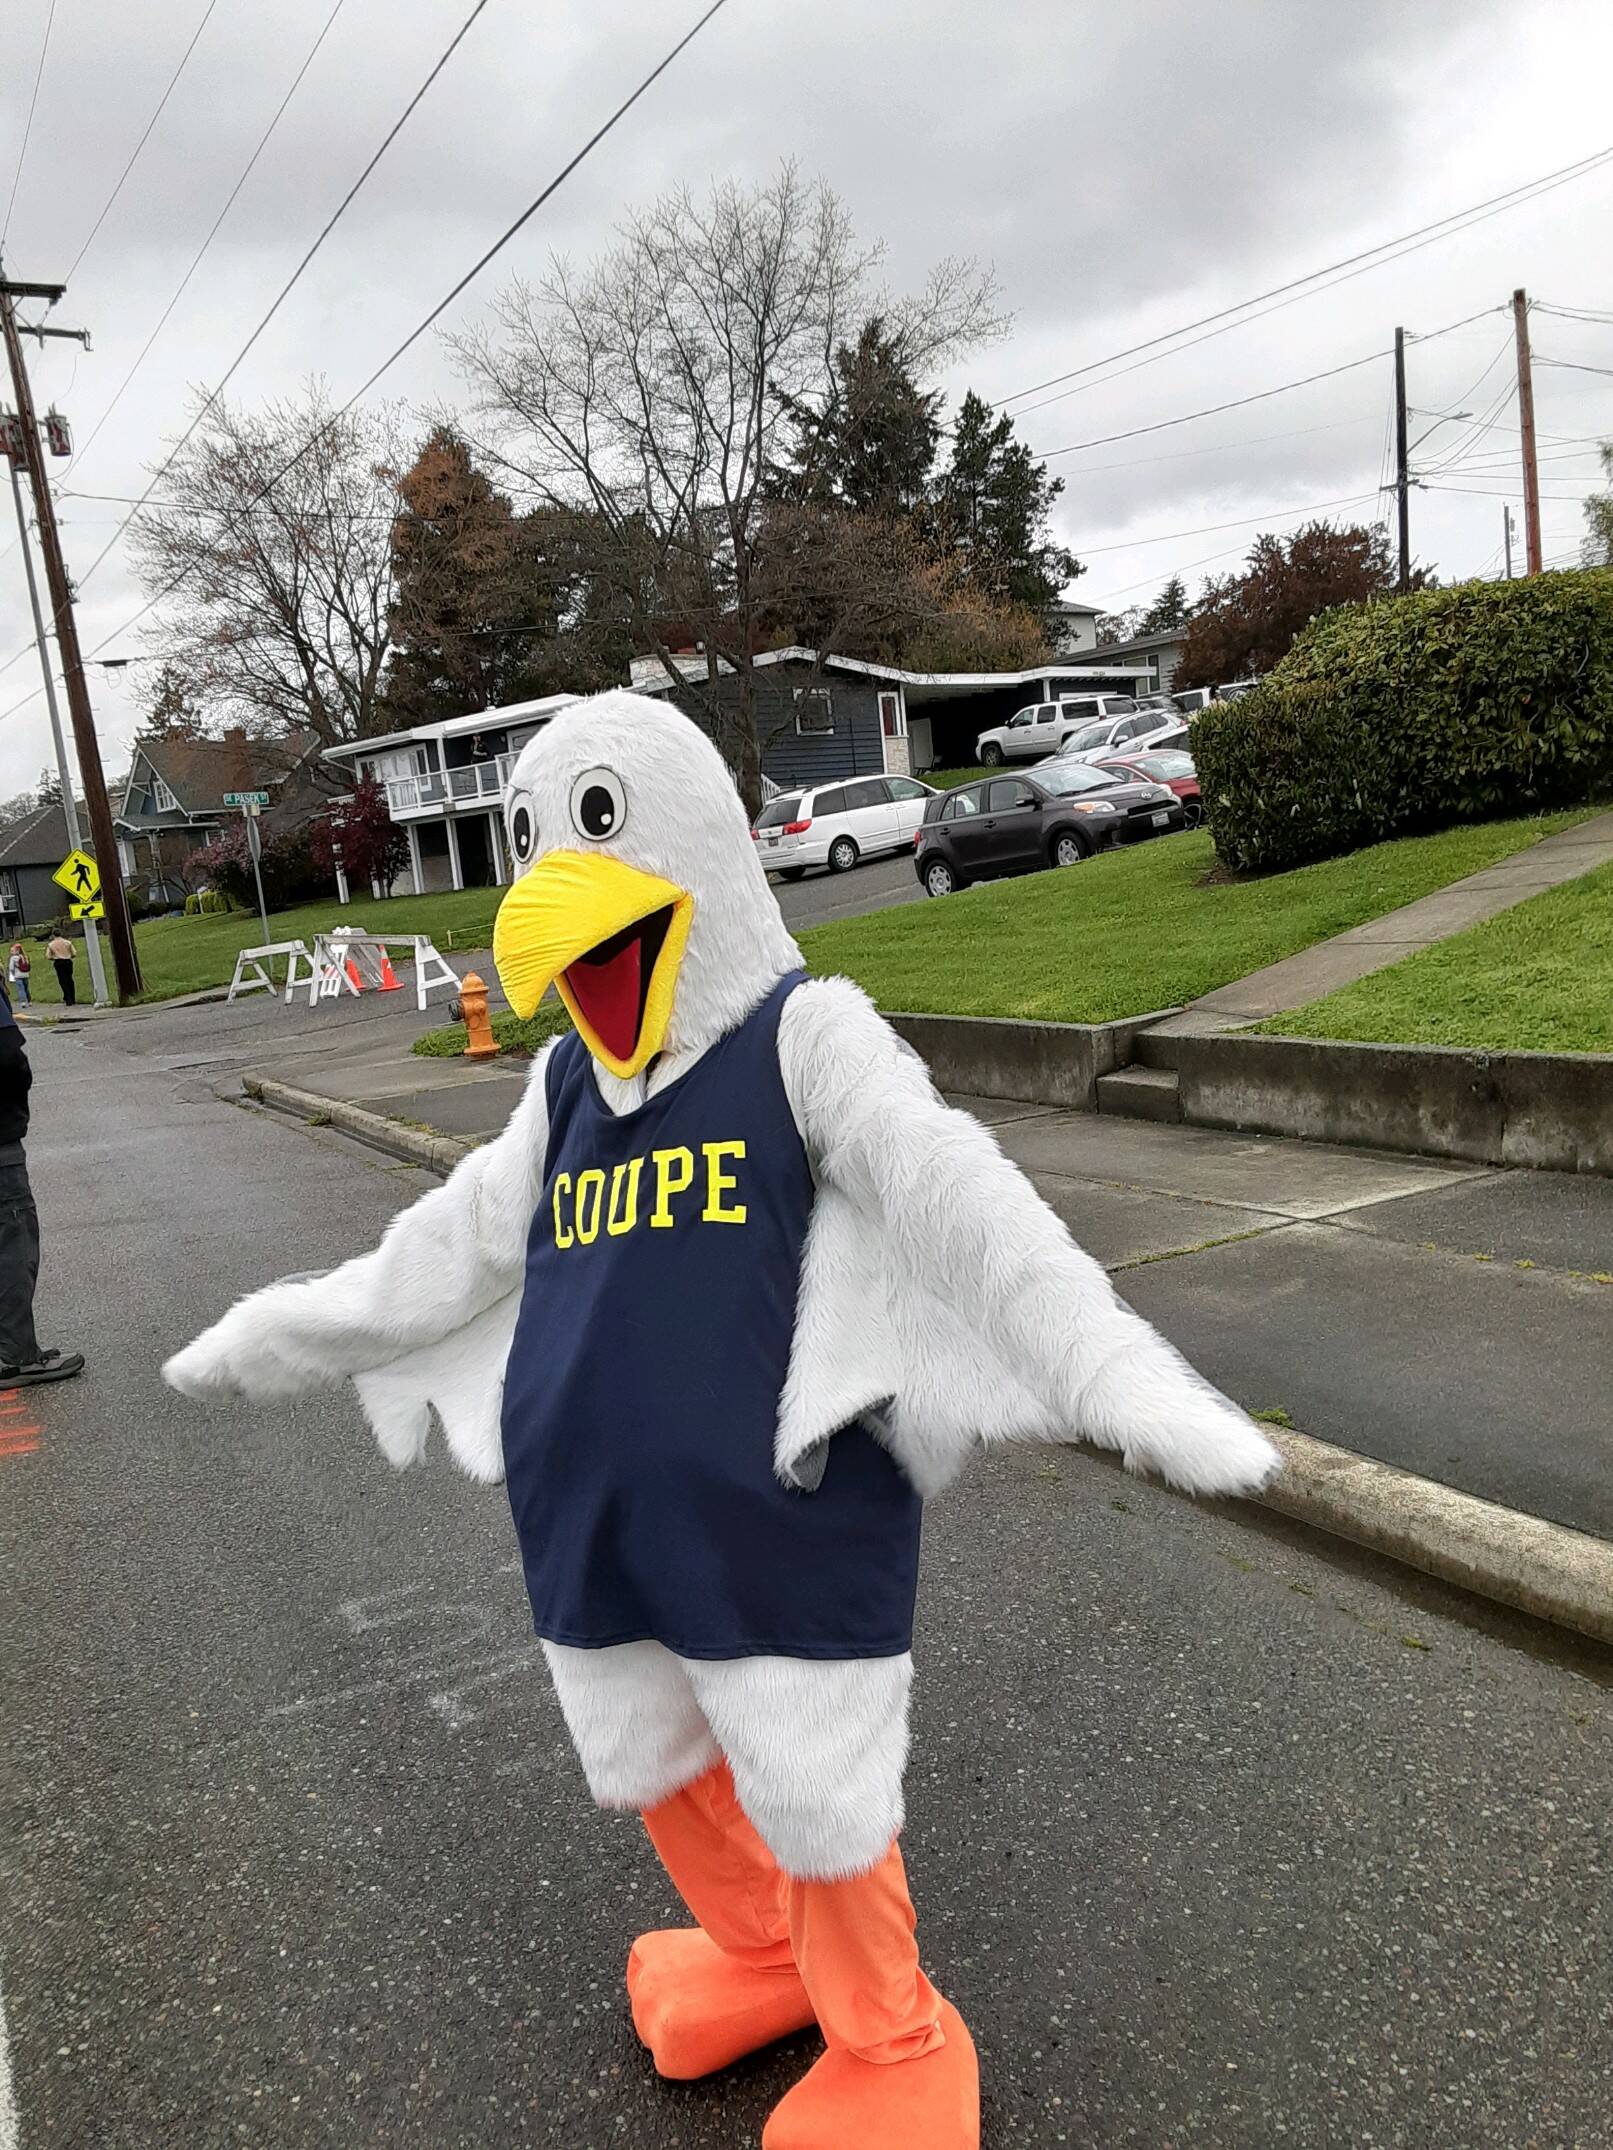 Coupe the seagull will make his debut appearance this year at the Coupeville Arts and Crafts Festival. (Photo provided)